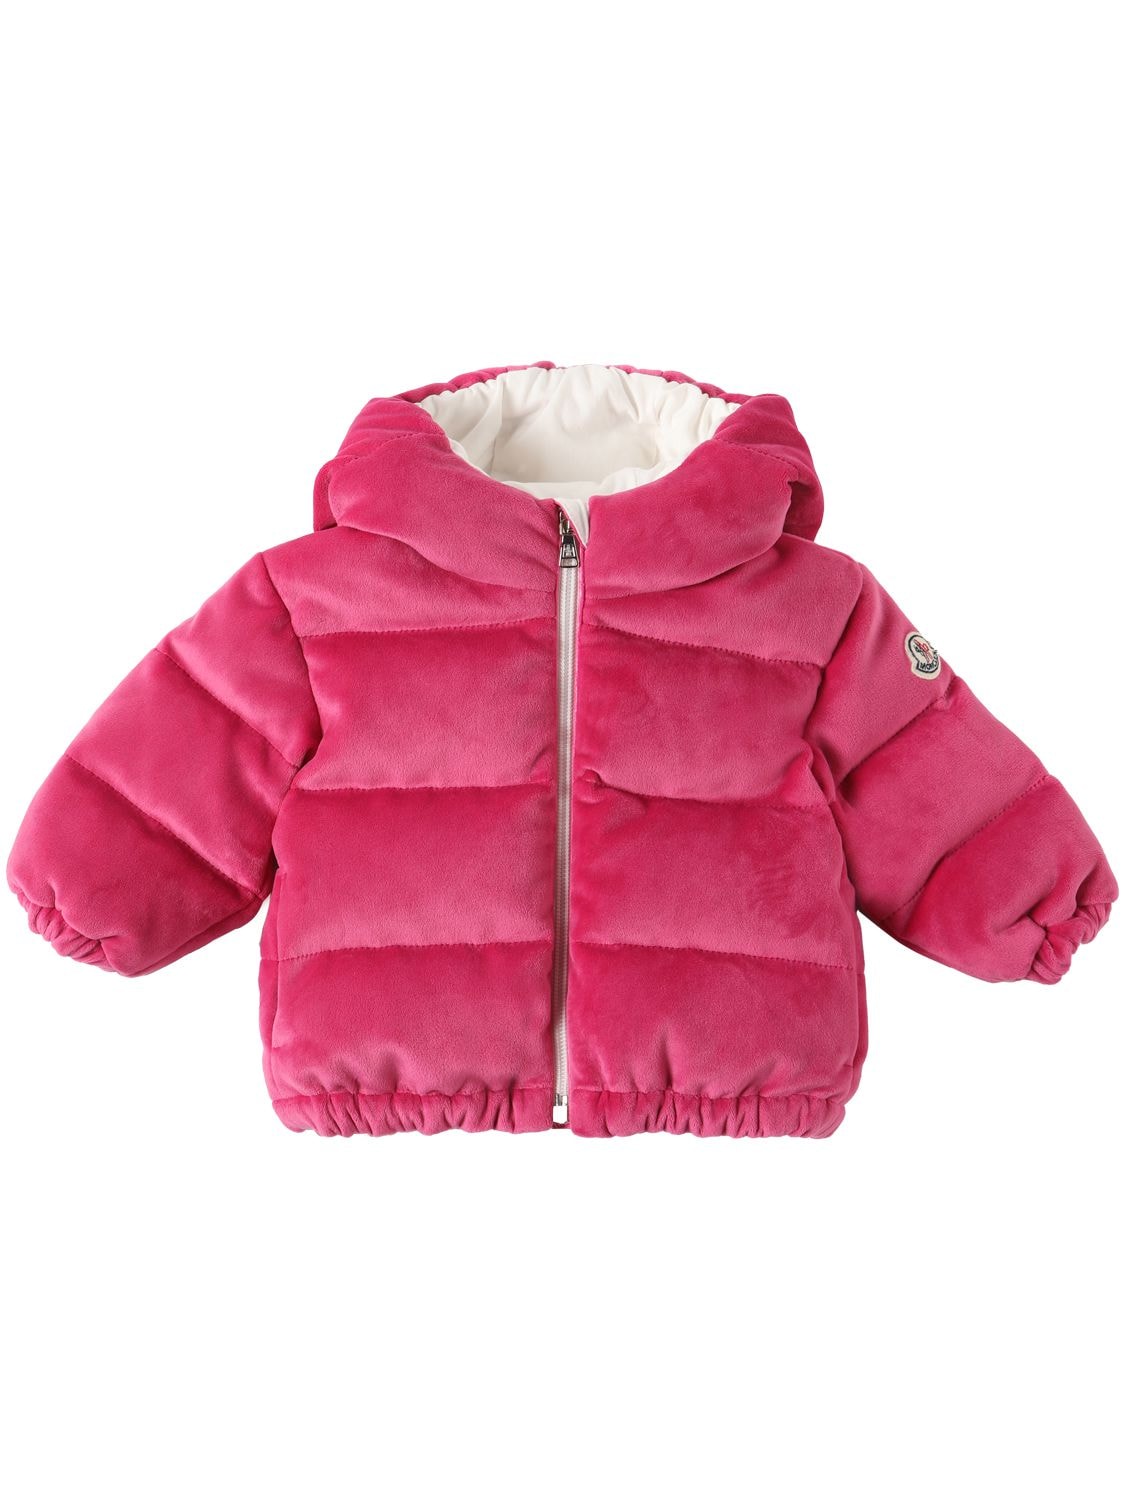 Moncler Girls' Daos Chenille Down Jacket - Baby, Little Kid In Bright Pink